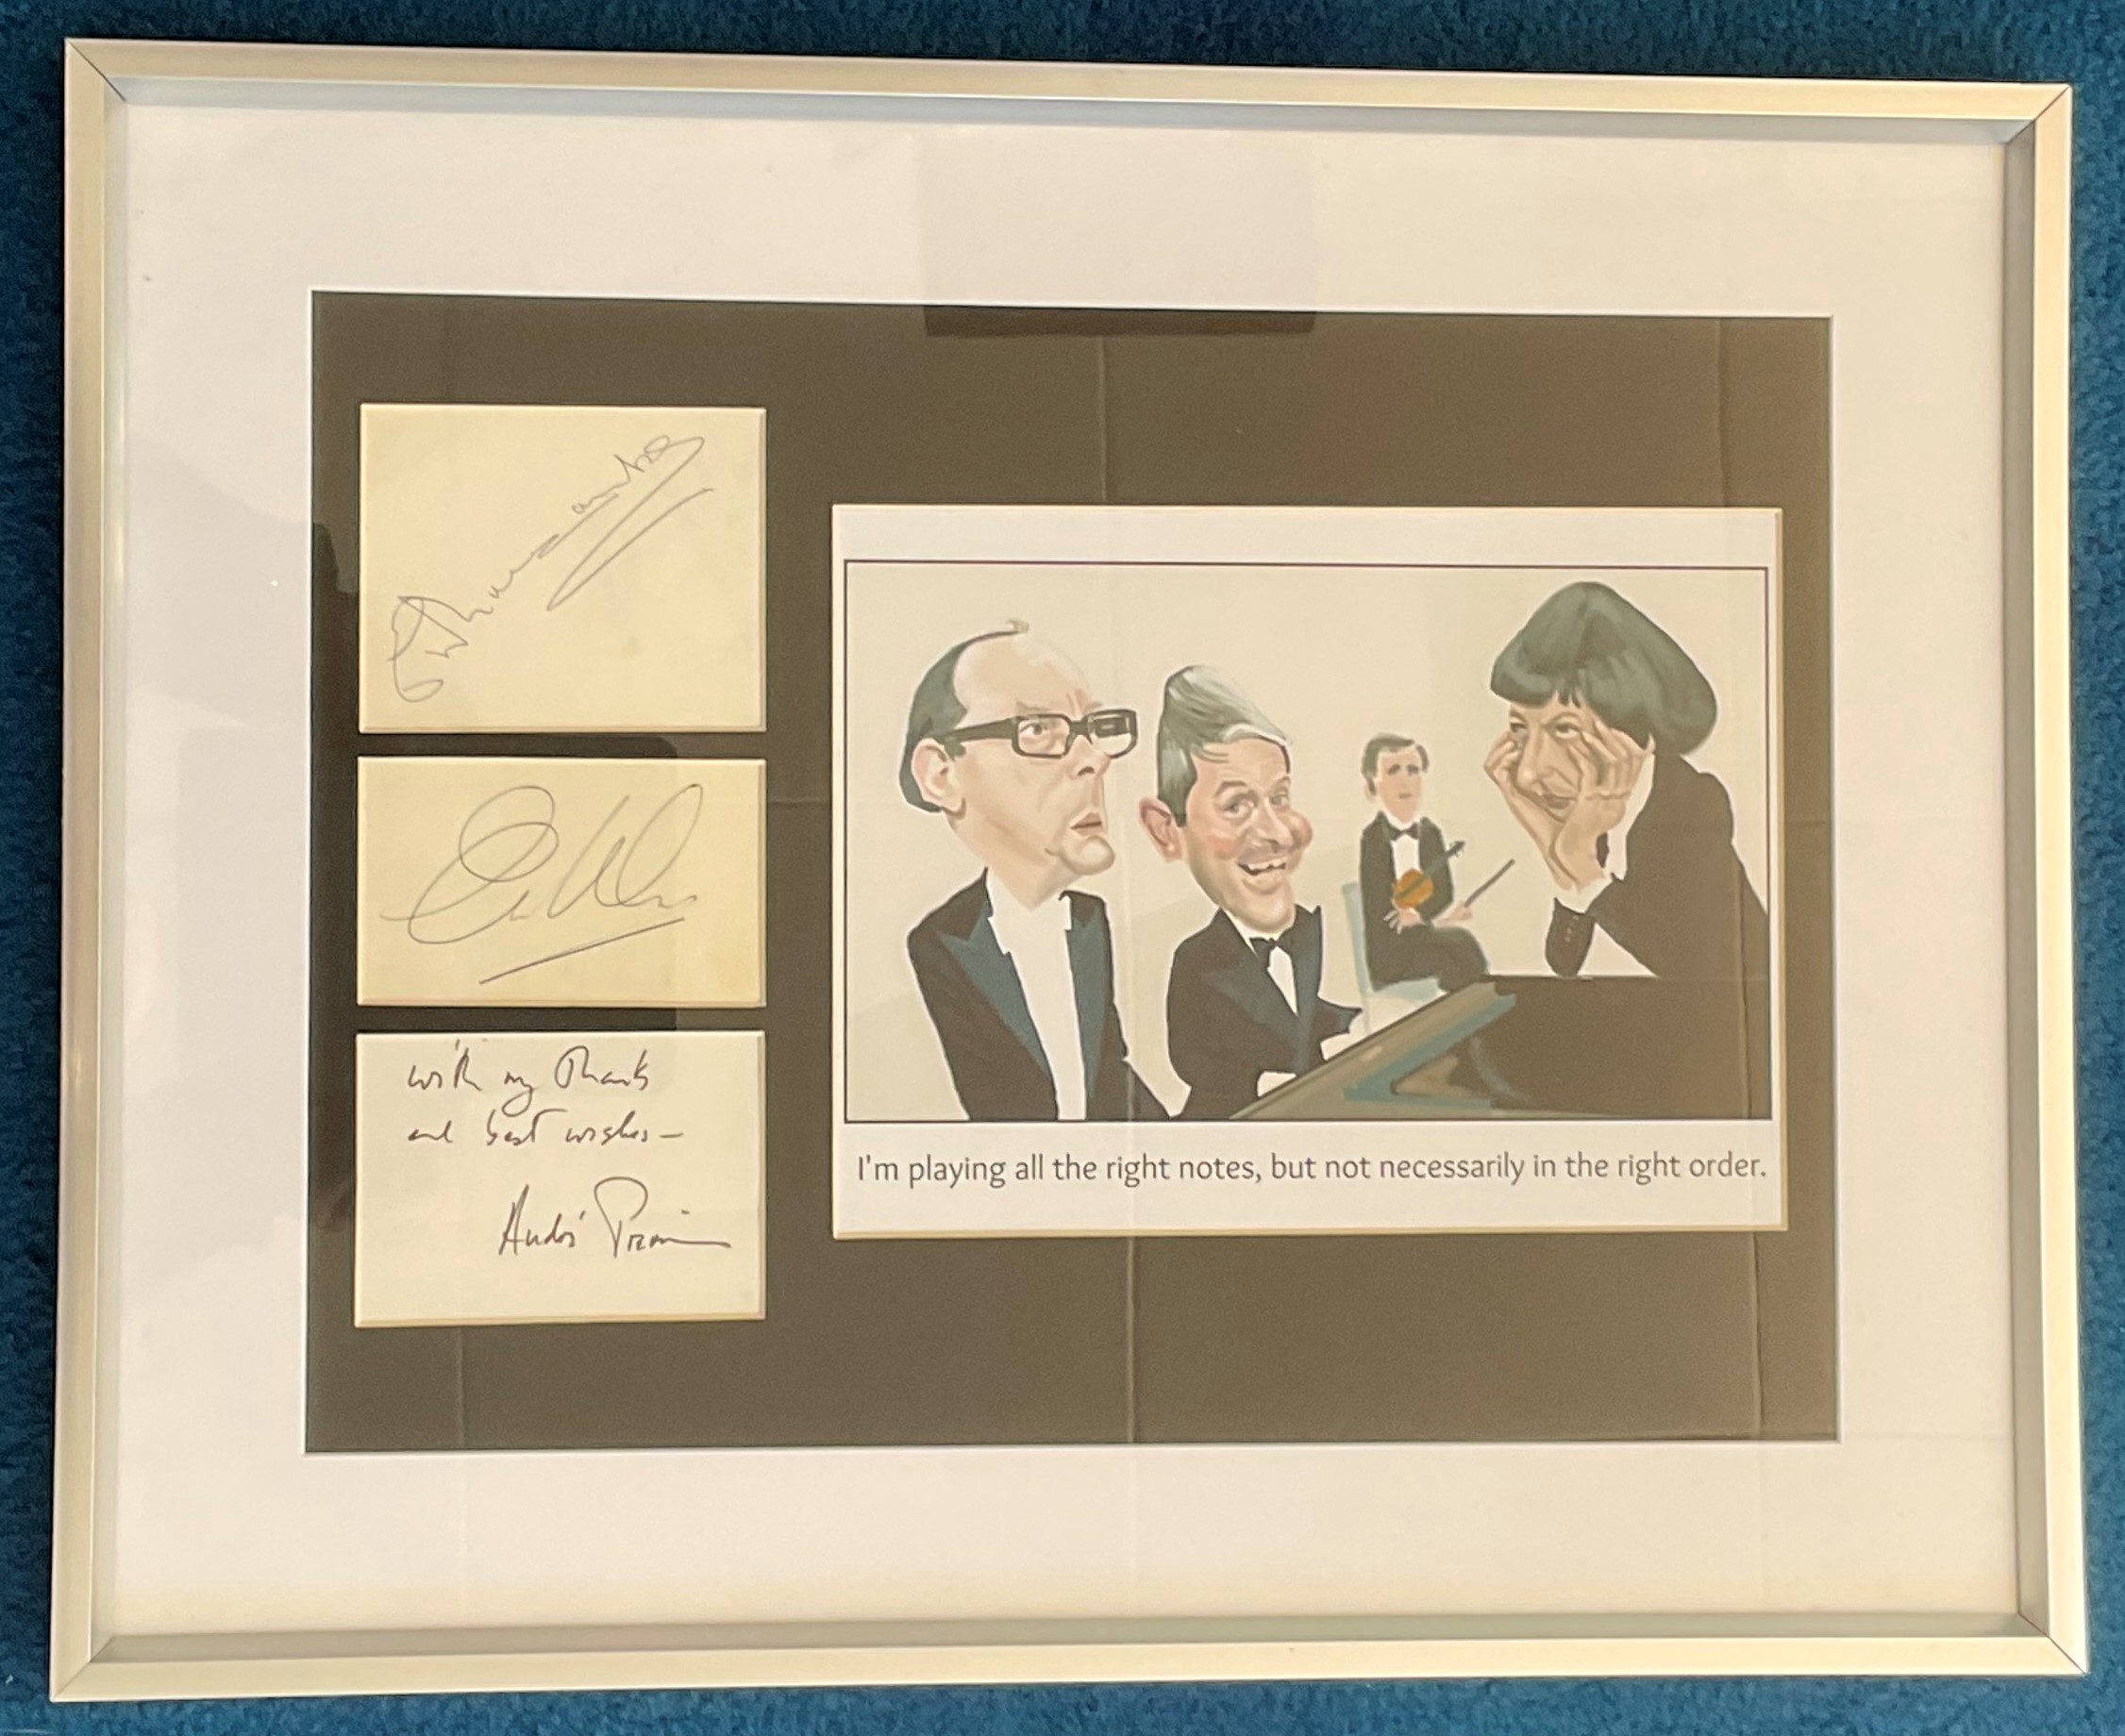 Morecambe and Wise and Andre Previn 20x16 mounted and framed signature piece includes three signed